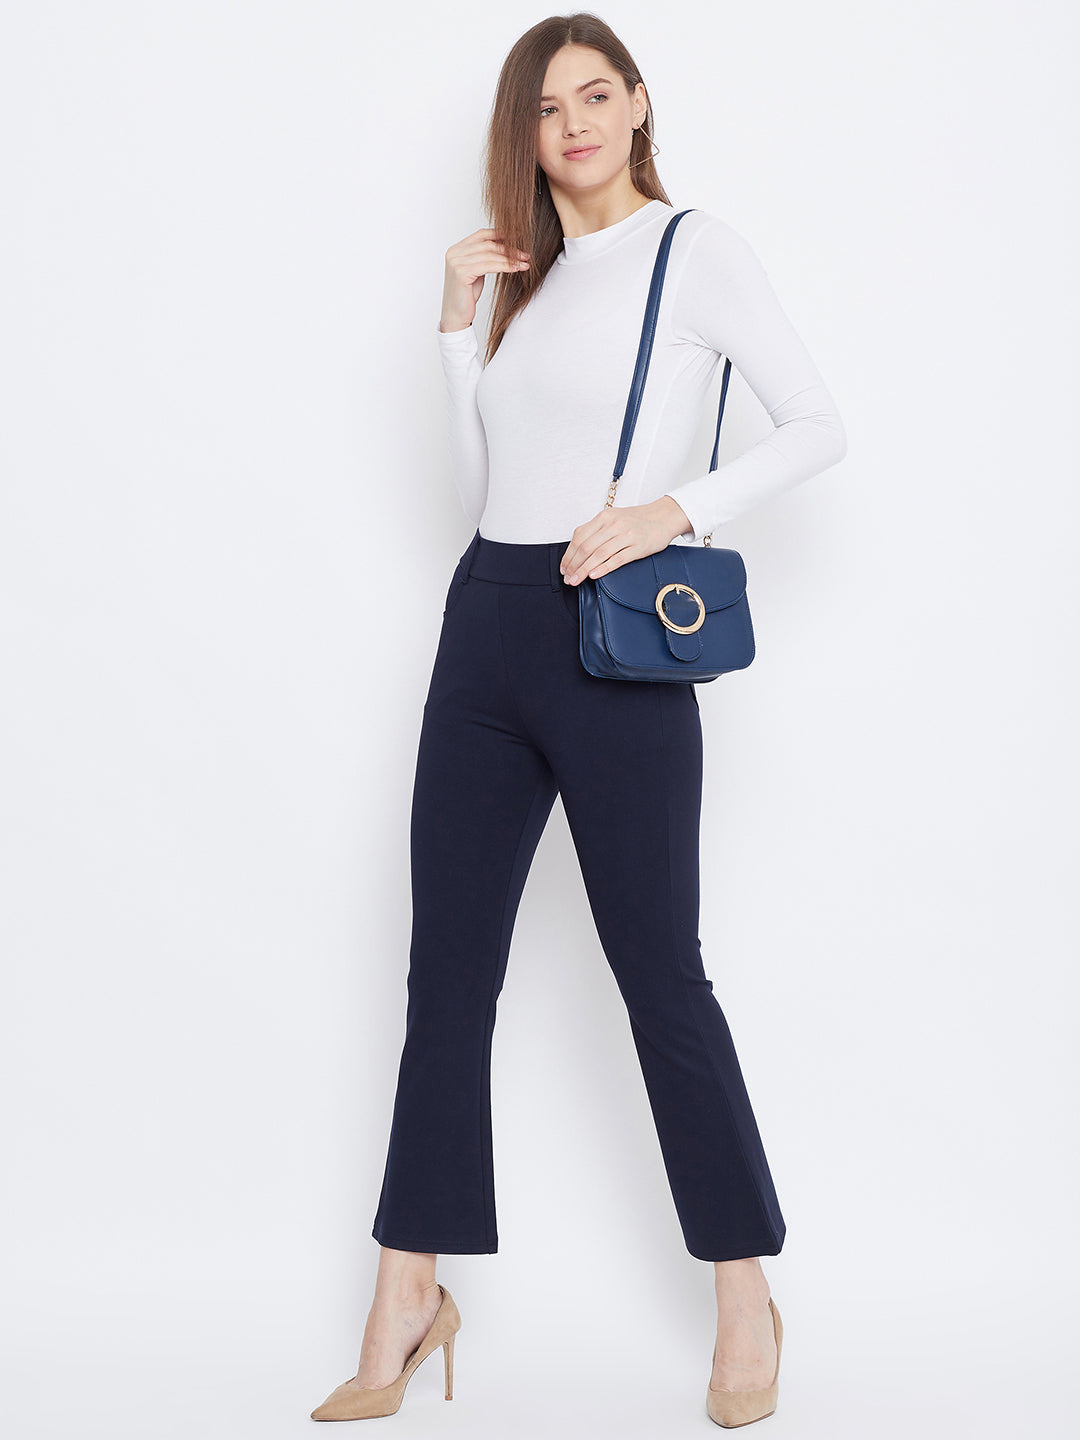 Clora Navy Blue Solid Bootcut Jeggings